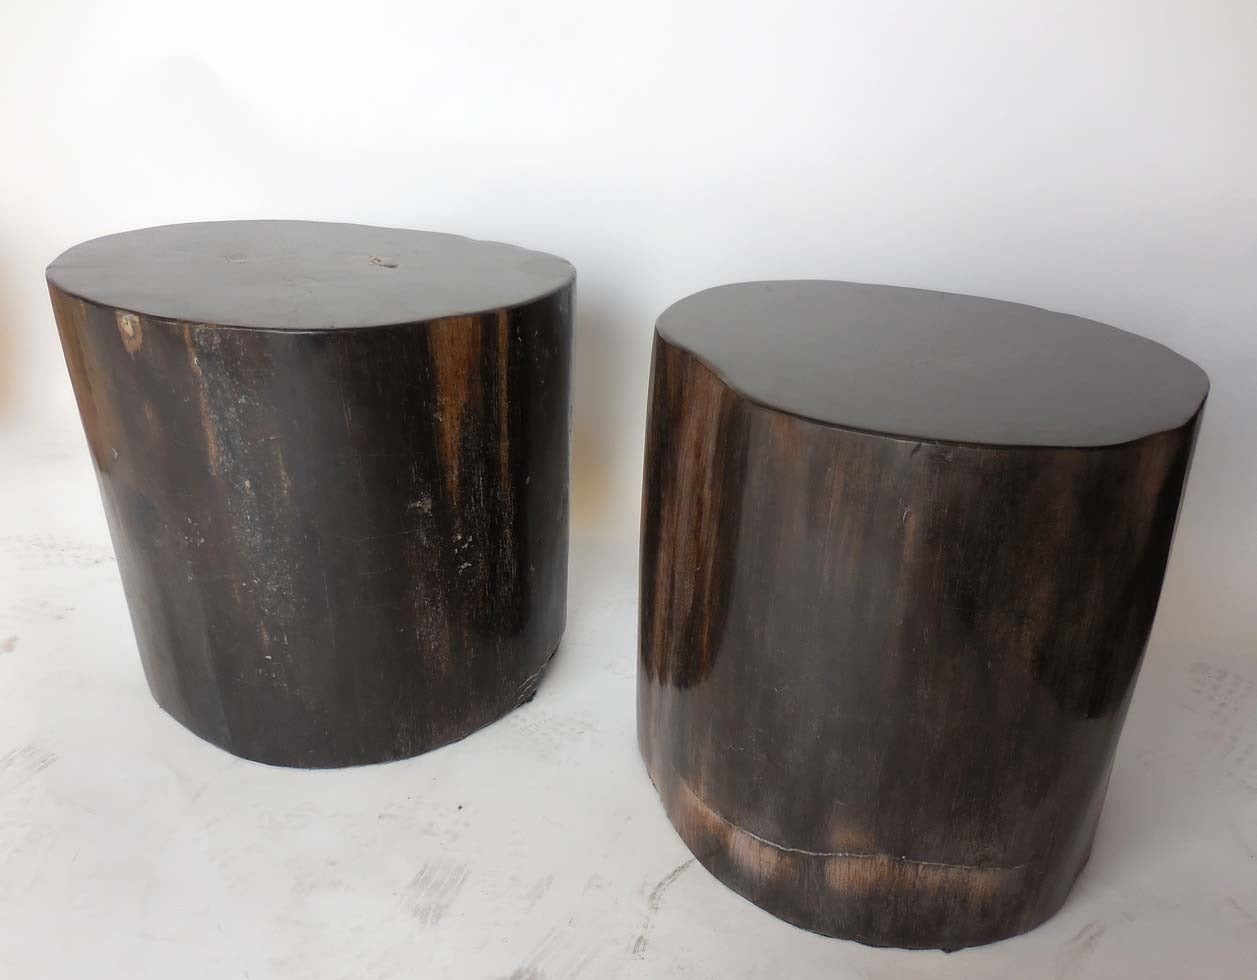 Two black petrified wood or stone stools or side tables. Beautiful
can be sold separately.
Dimension: Left measures: 20 x 17 x 17.5 H.
Right measures: 18 x 17 x 17.5 H.